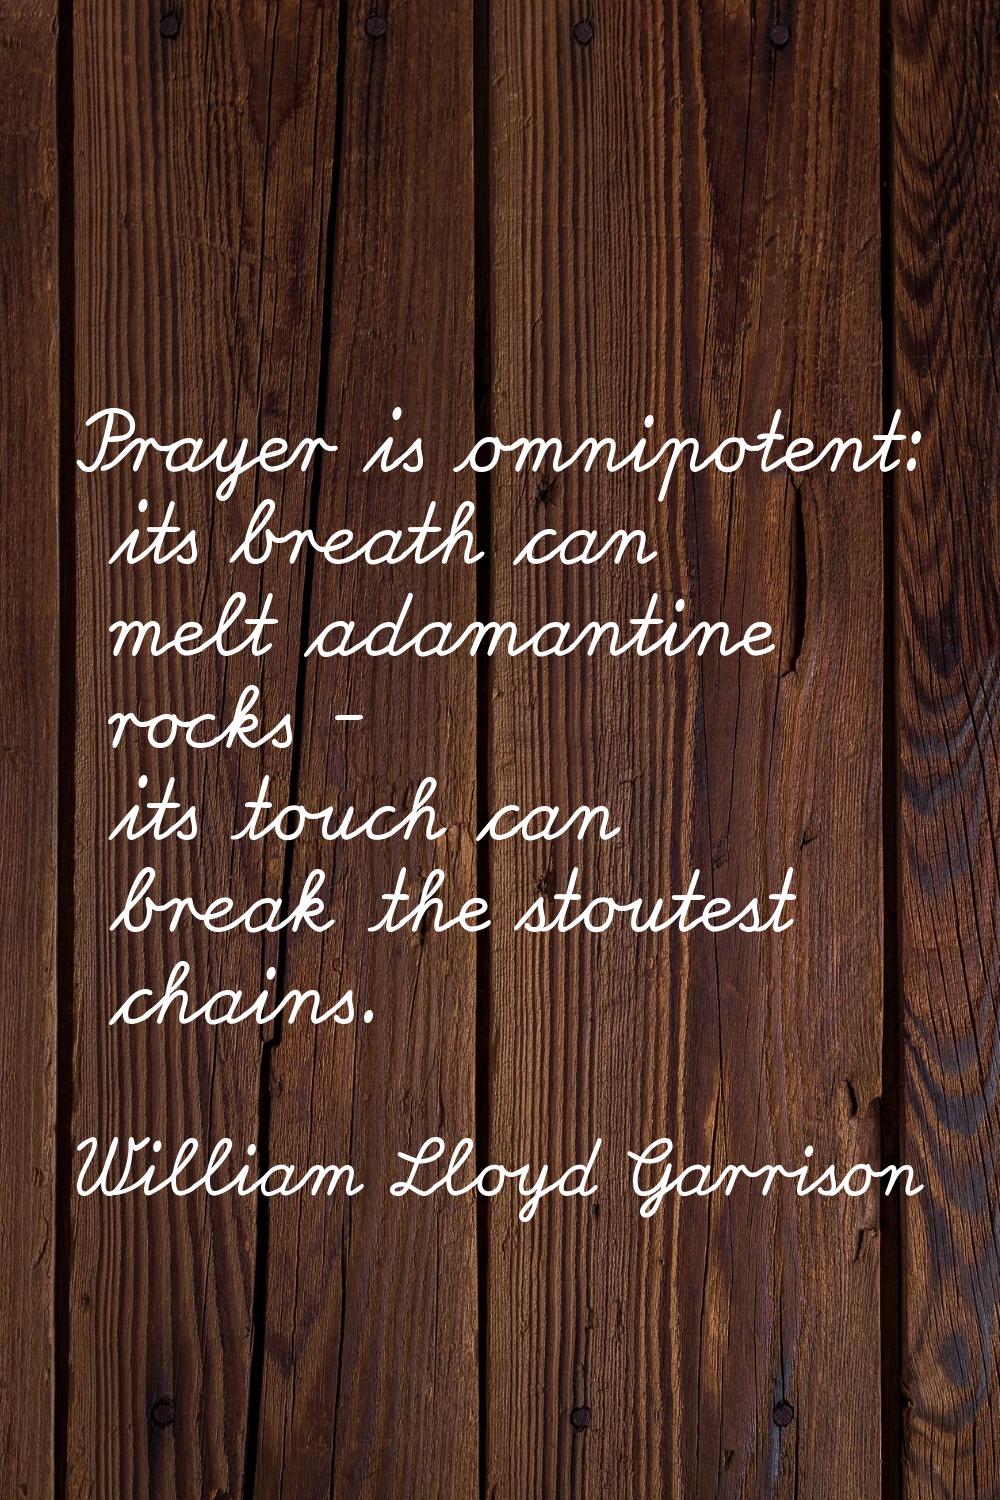 Prayer is omnipotent: its breath can melt adamantine rocks - its touch can break the stoutest chain